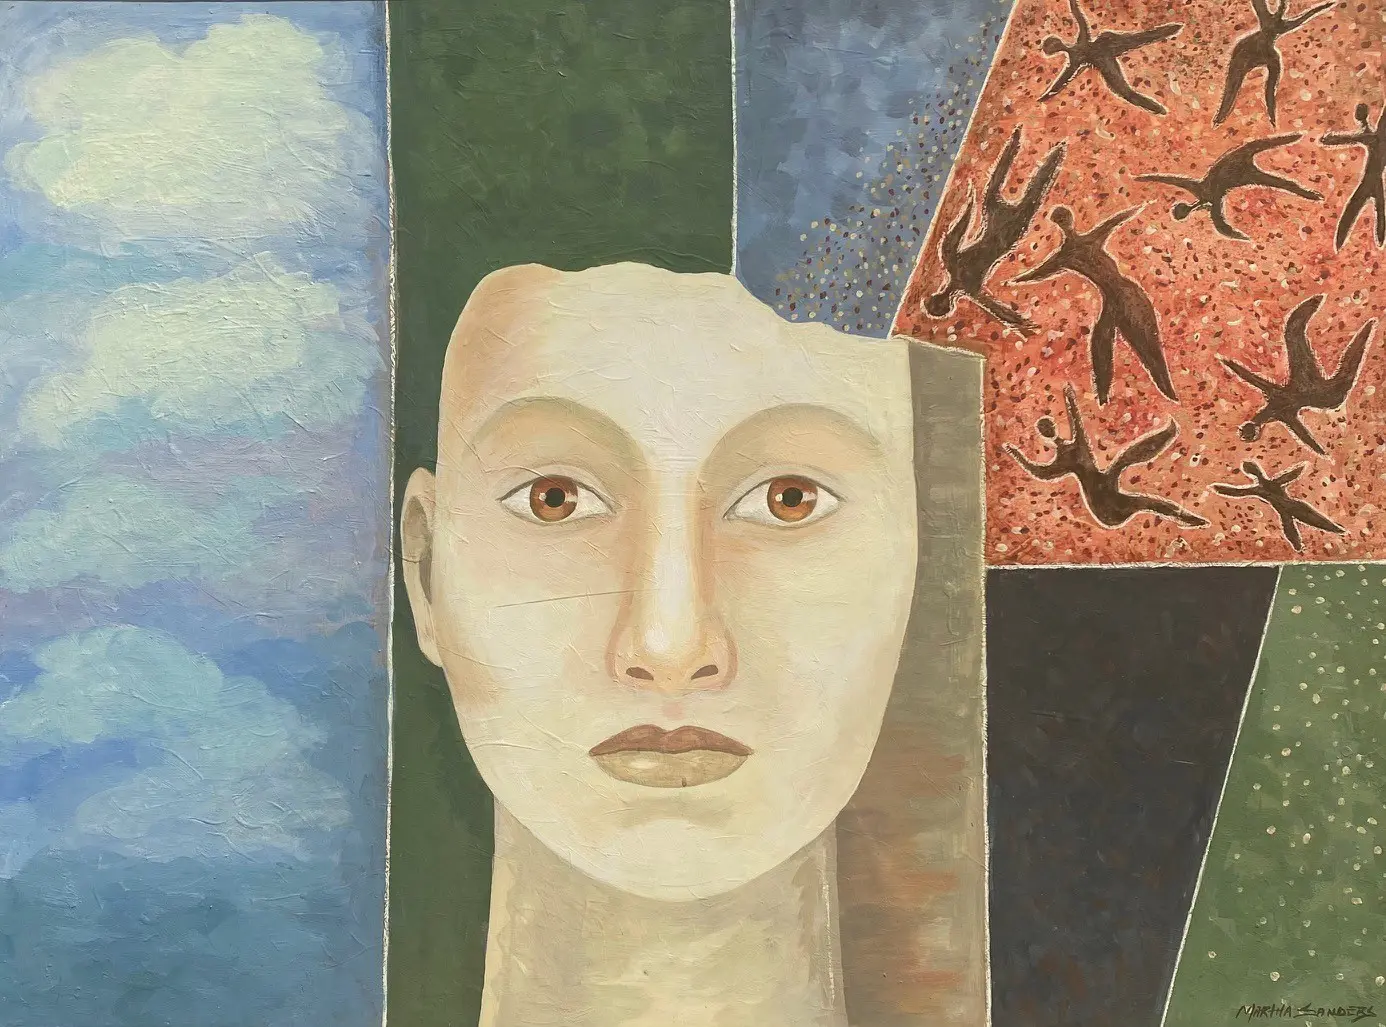 A painting of a woman 's face with birds flying around her head.